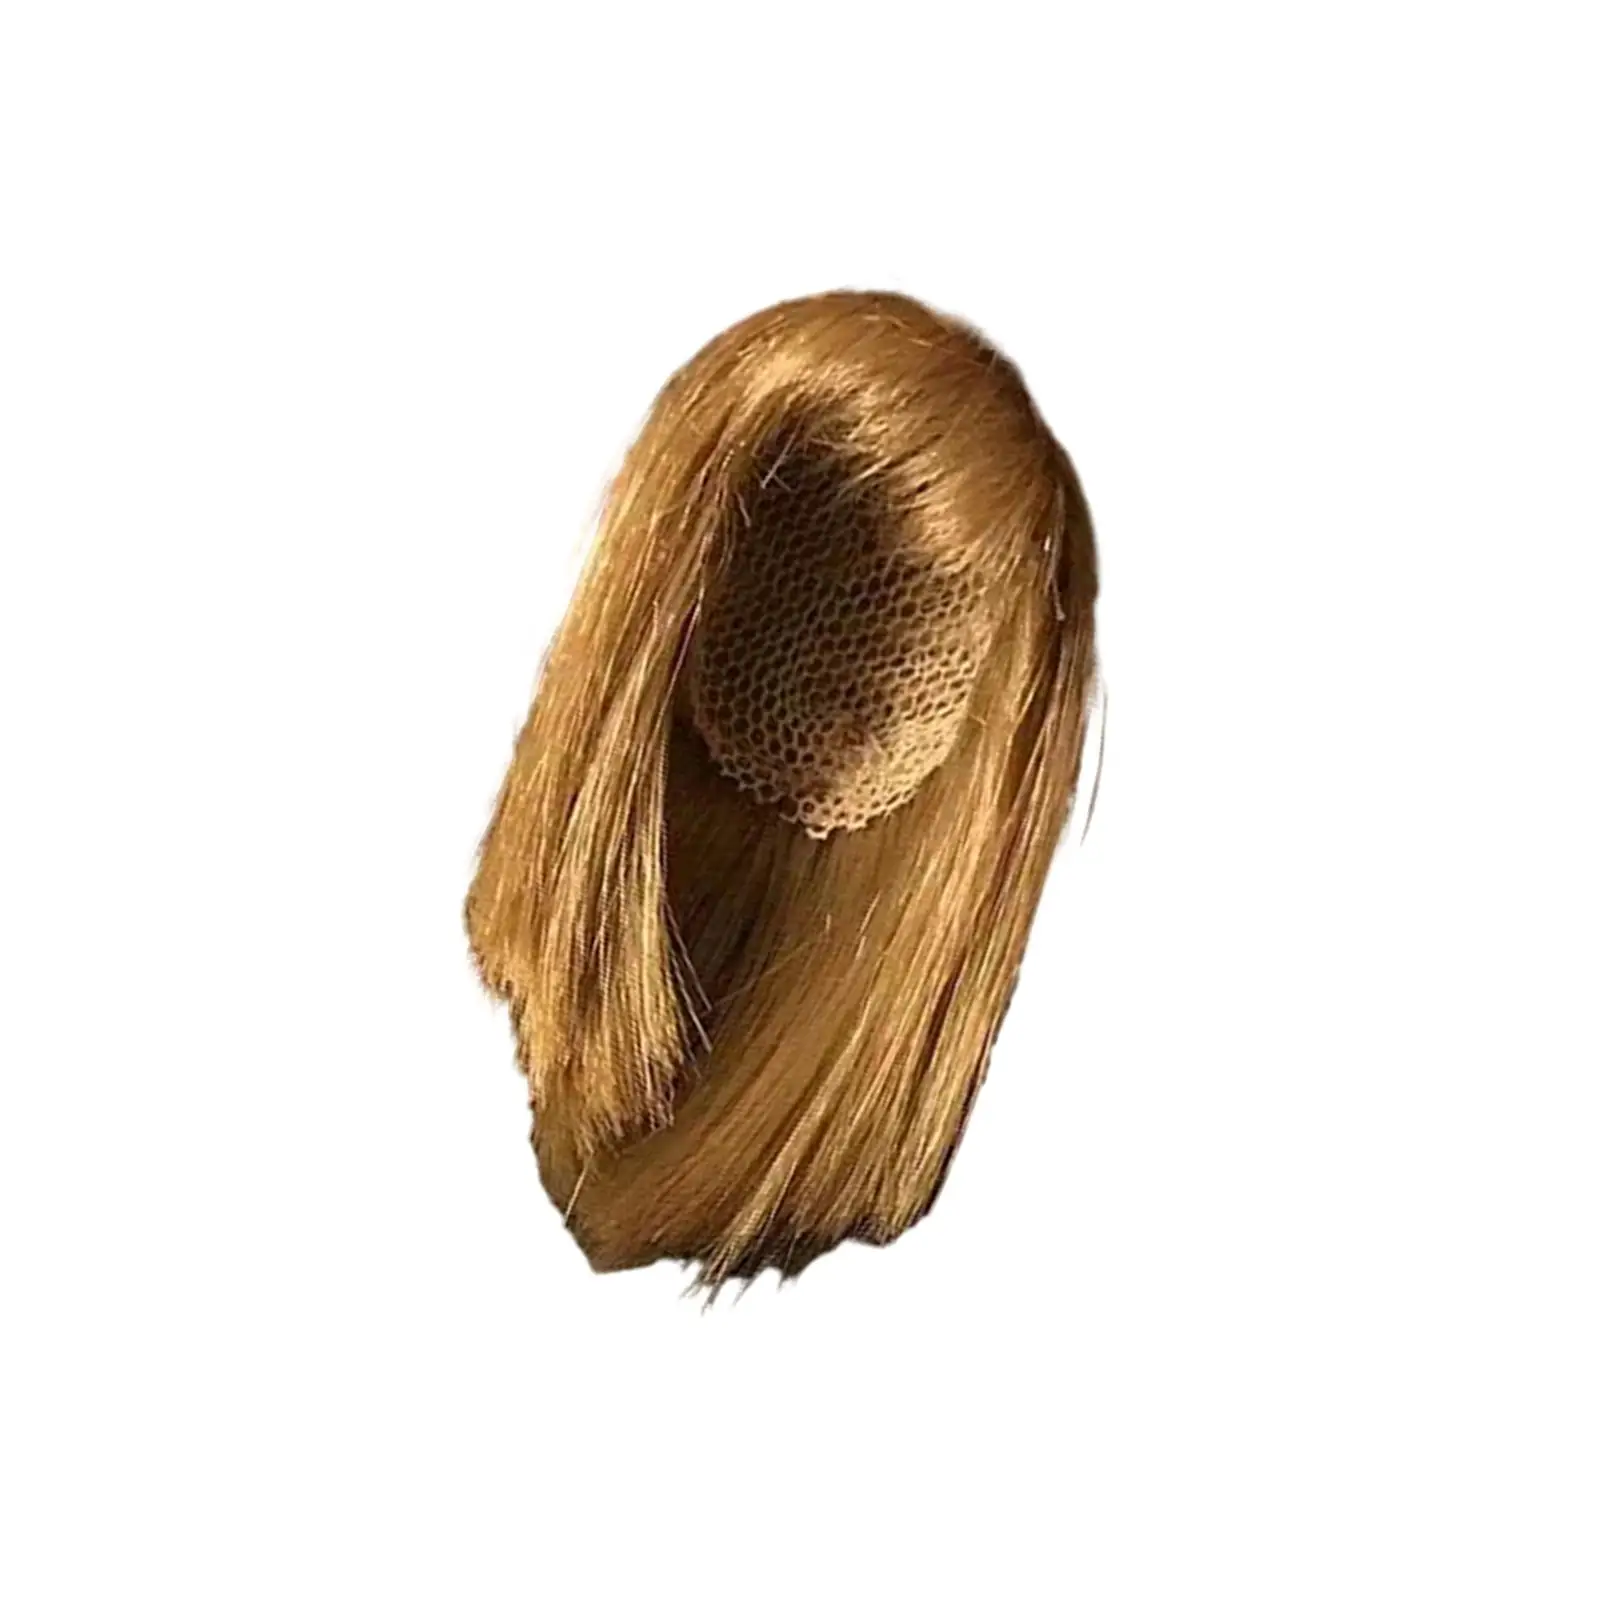 1:6 Scale Female Blonde Hair Smooth (18cm Length) Fashion Salon Durable for 12inch Action Figure DIY Making Accessory